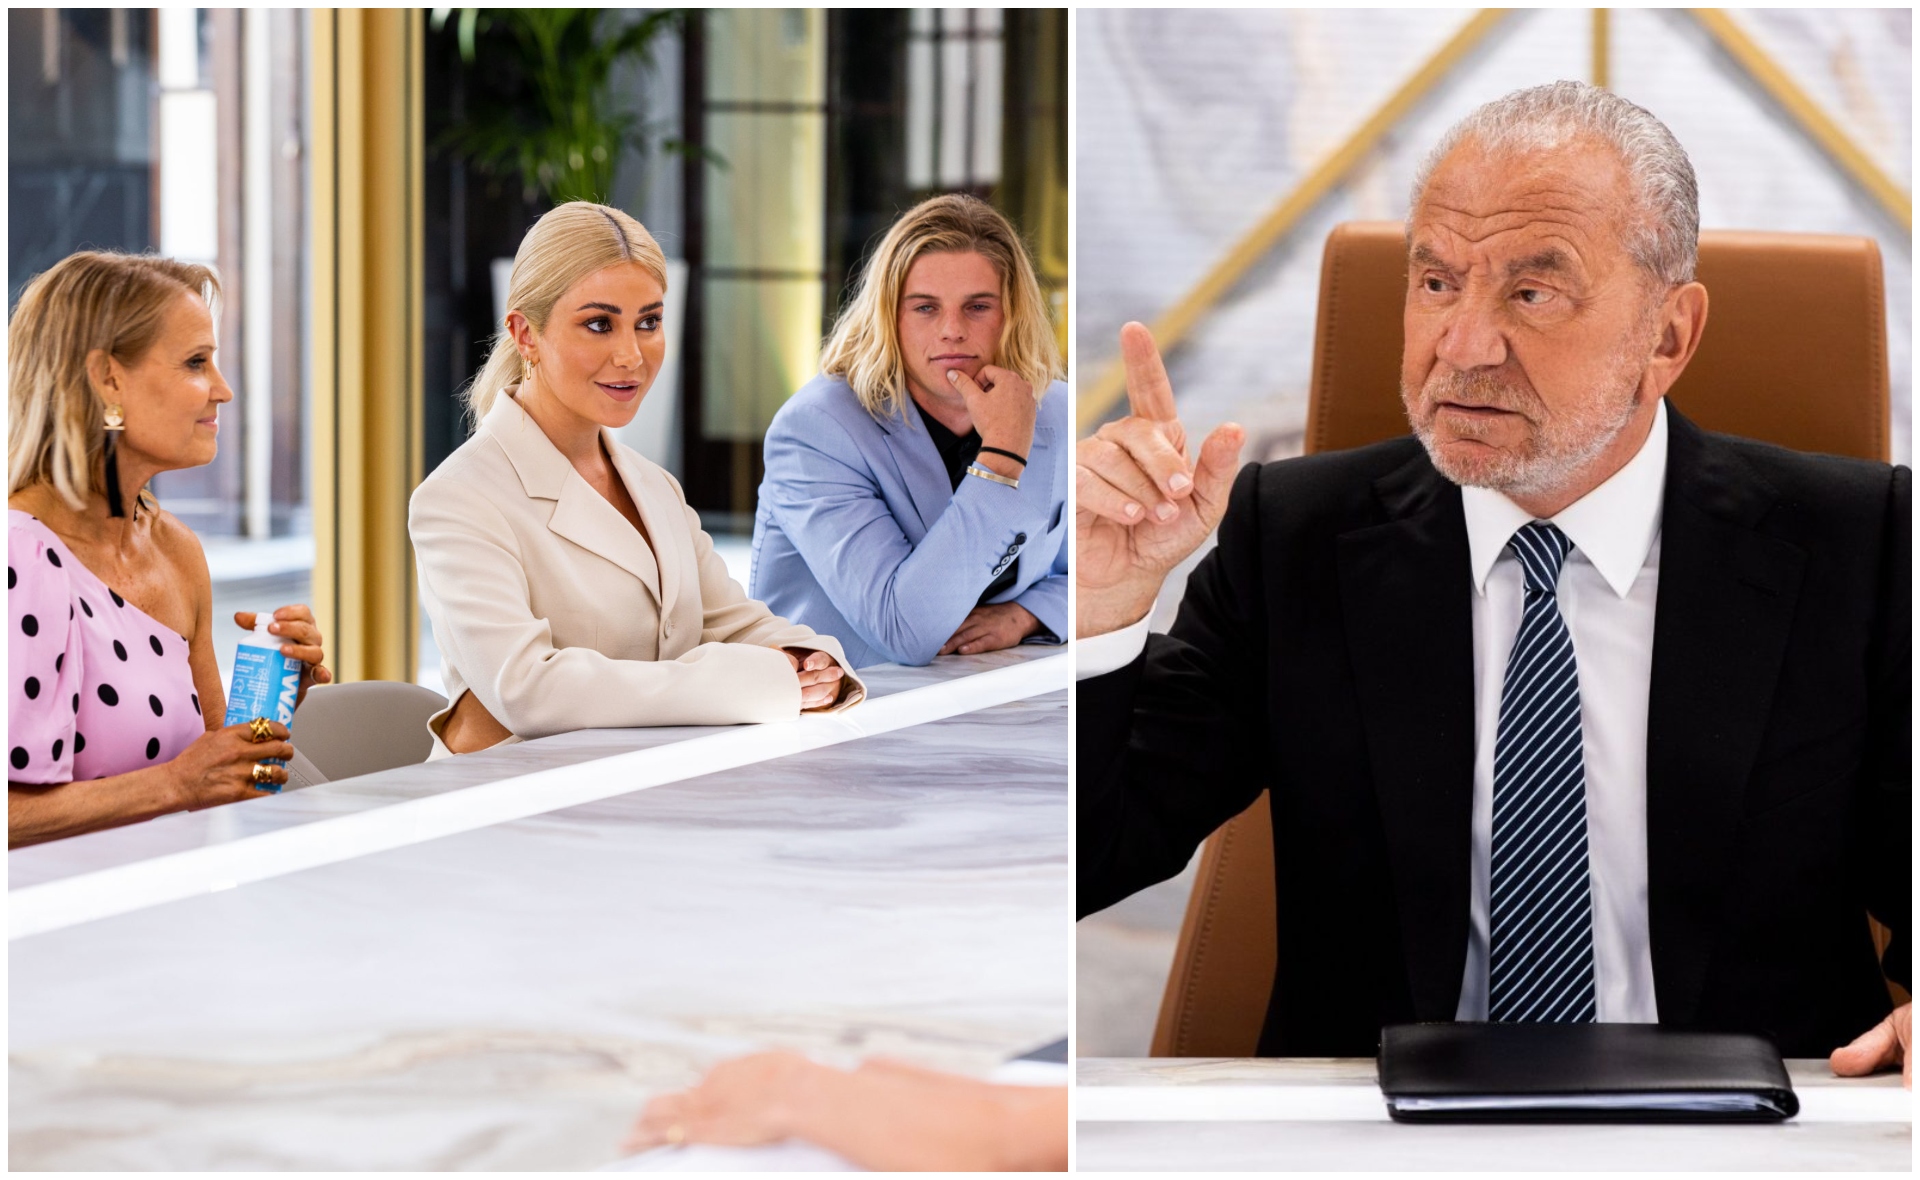 “You’re fired”: Everyone who heard those two gut-wrenching words from Lord Allan Sugar on Celebrity Apprentice